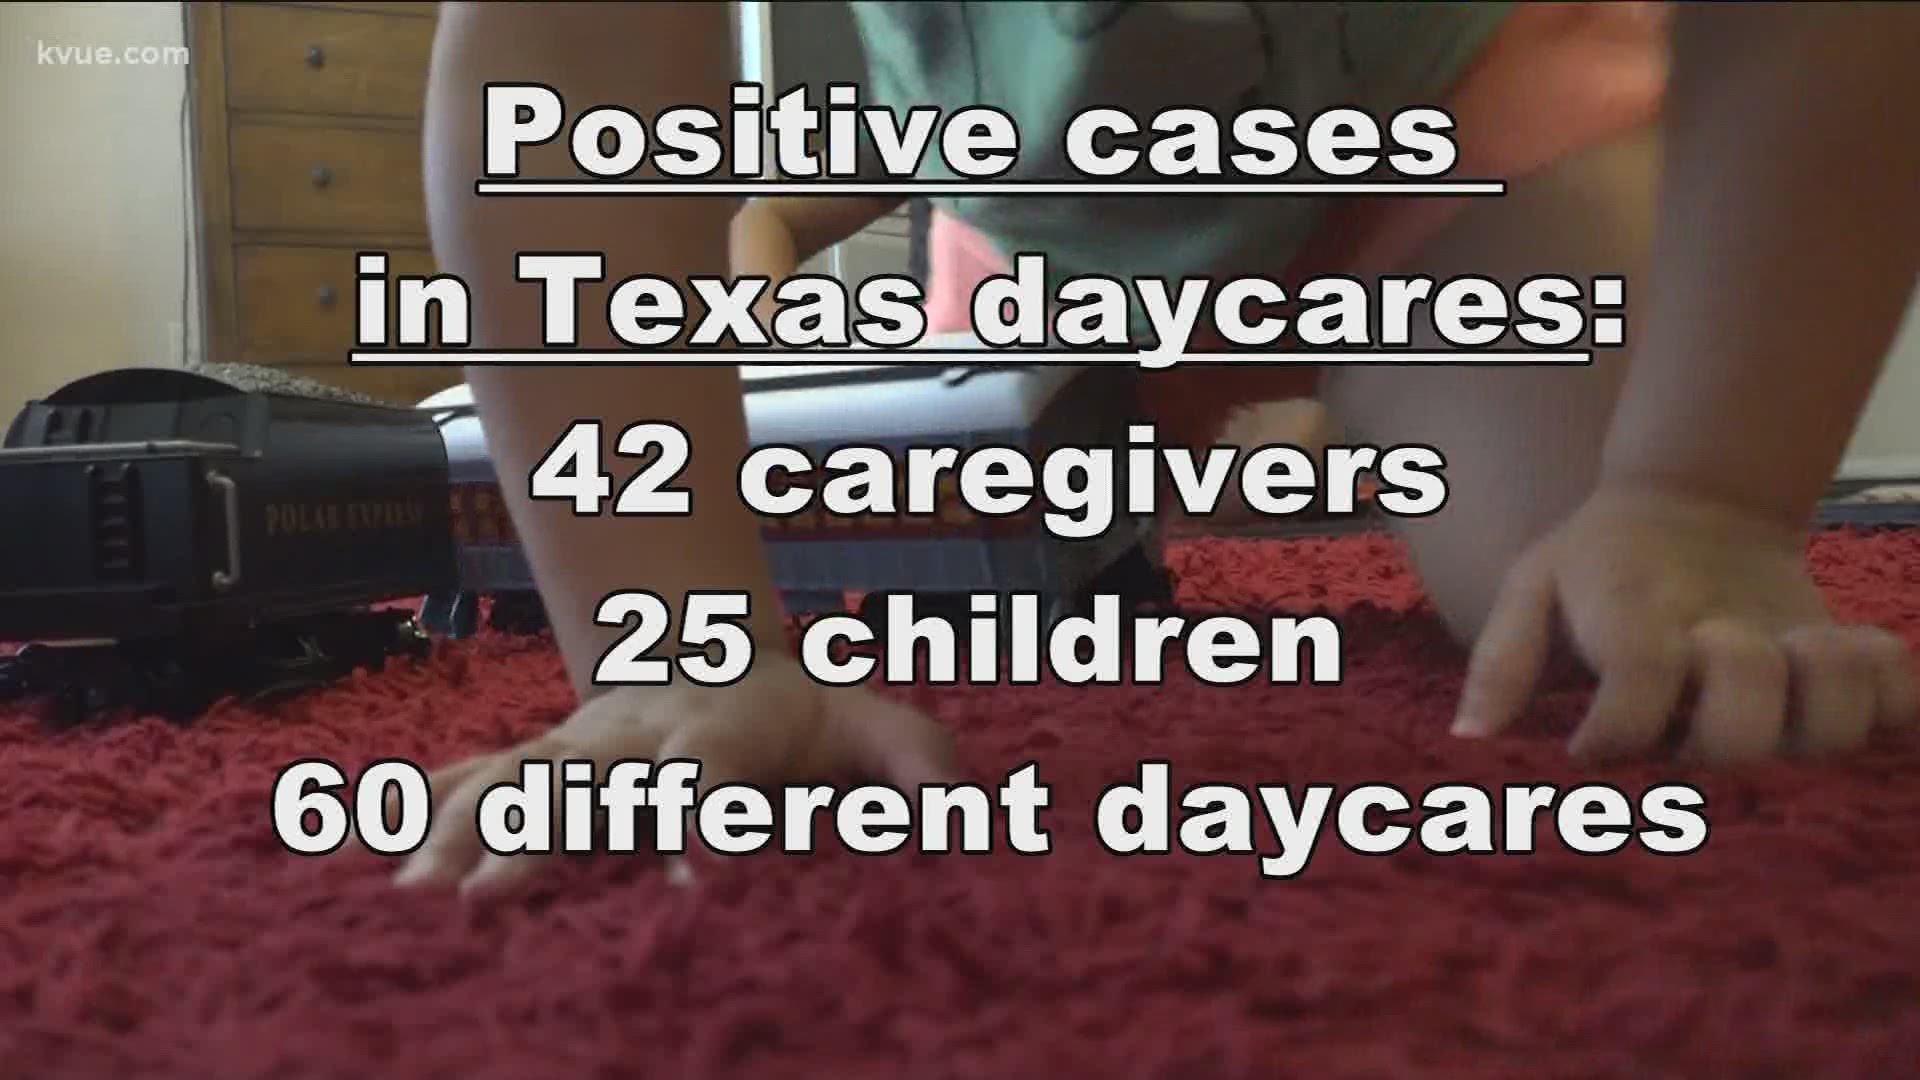 New numbers released from Texas Health and Human Services show that positive COVID-19 cases are on the rise in day cares across the state.